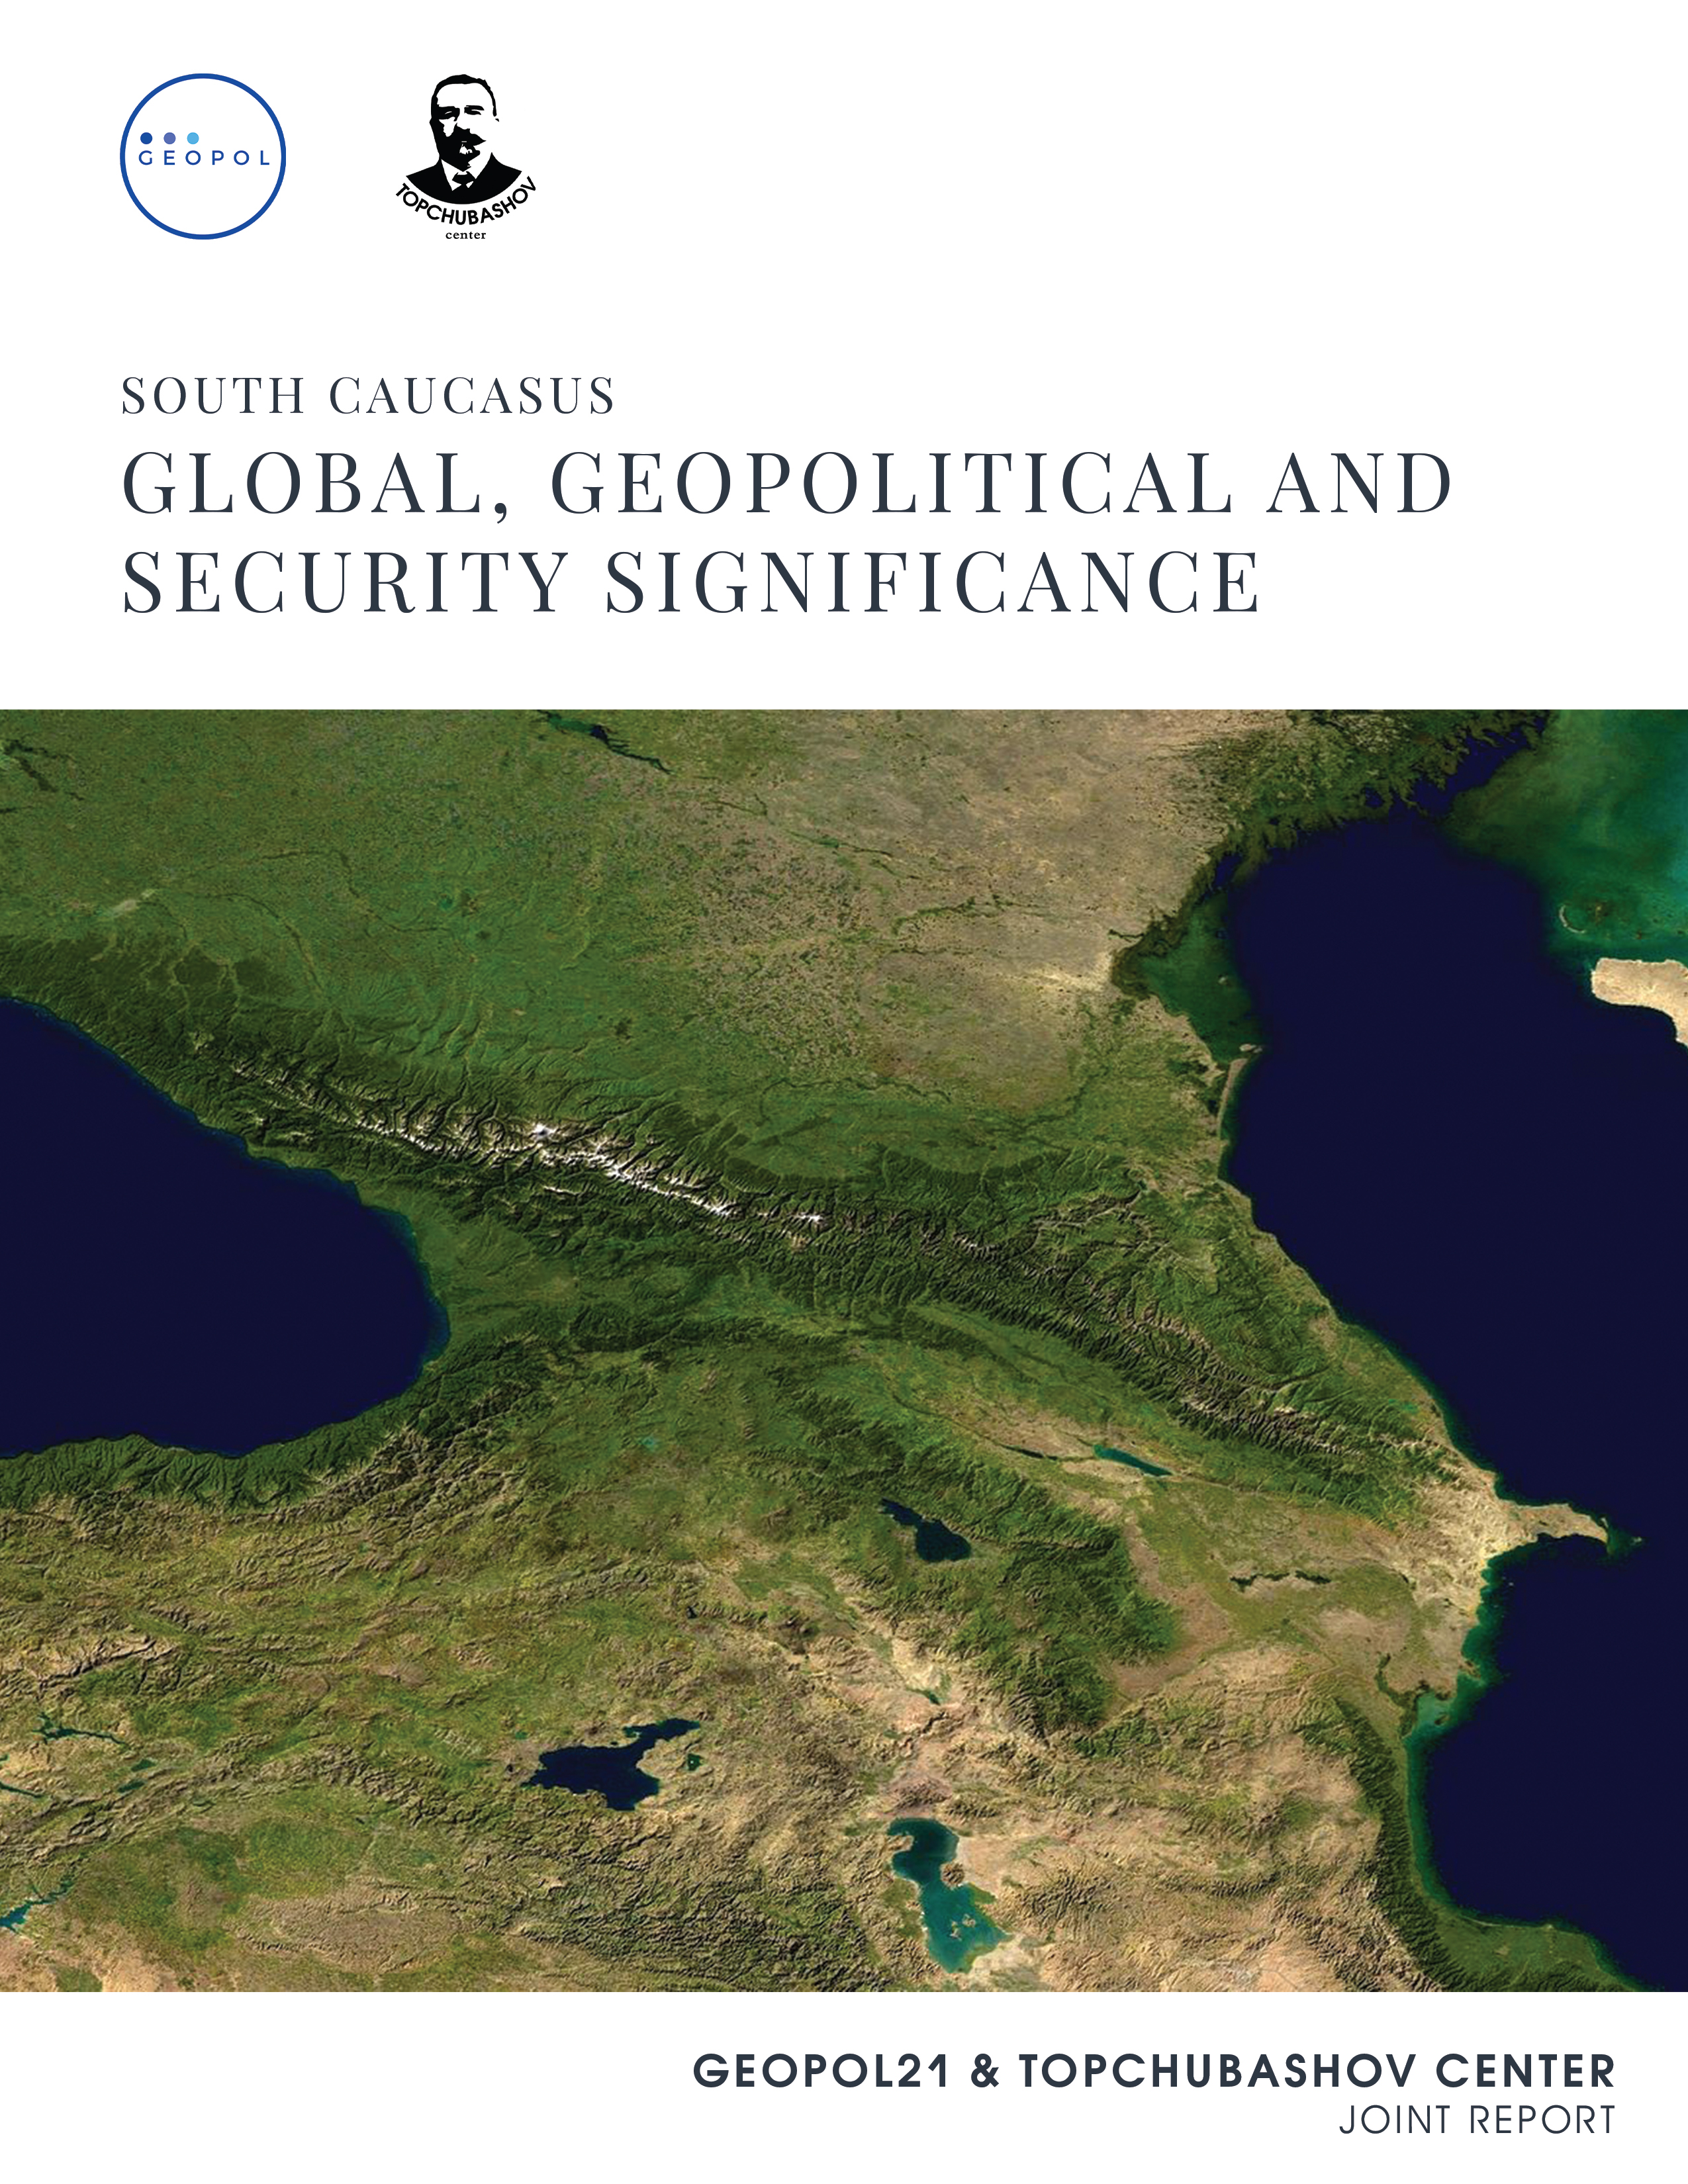 South Caucasus: Global, Geopolitical and security significance